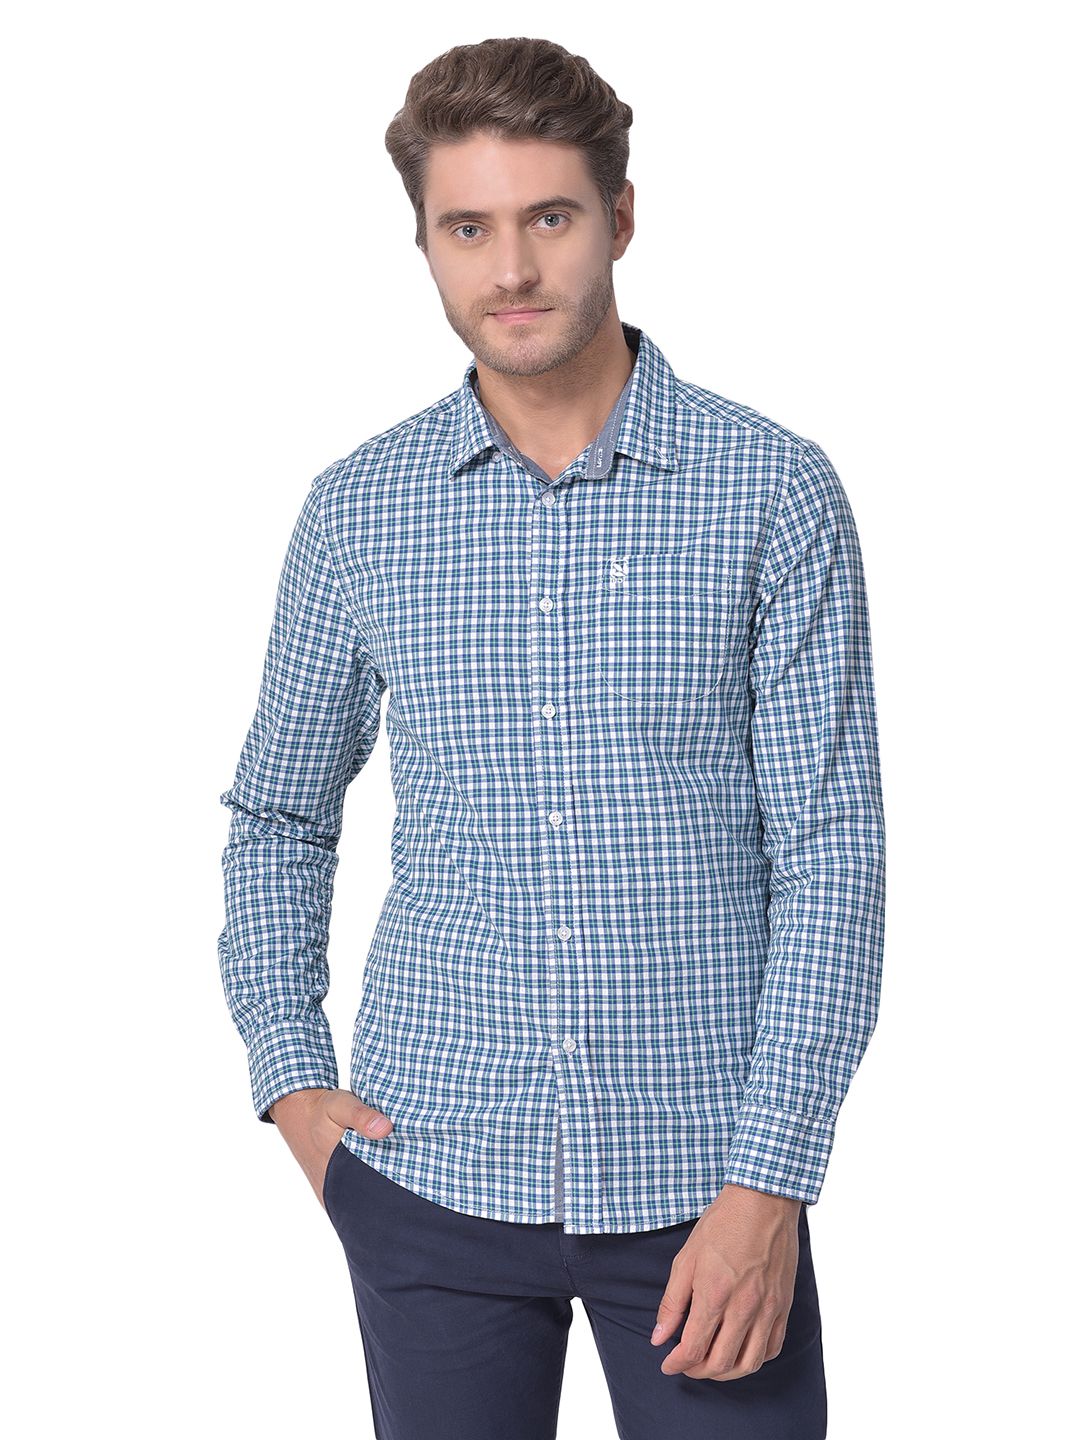 Green and blue check shirt for men